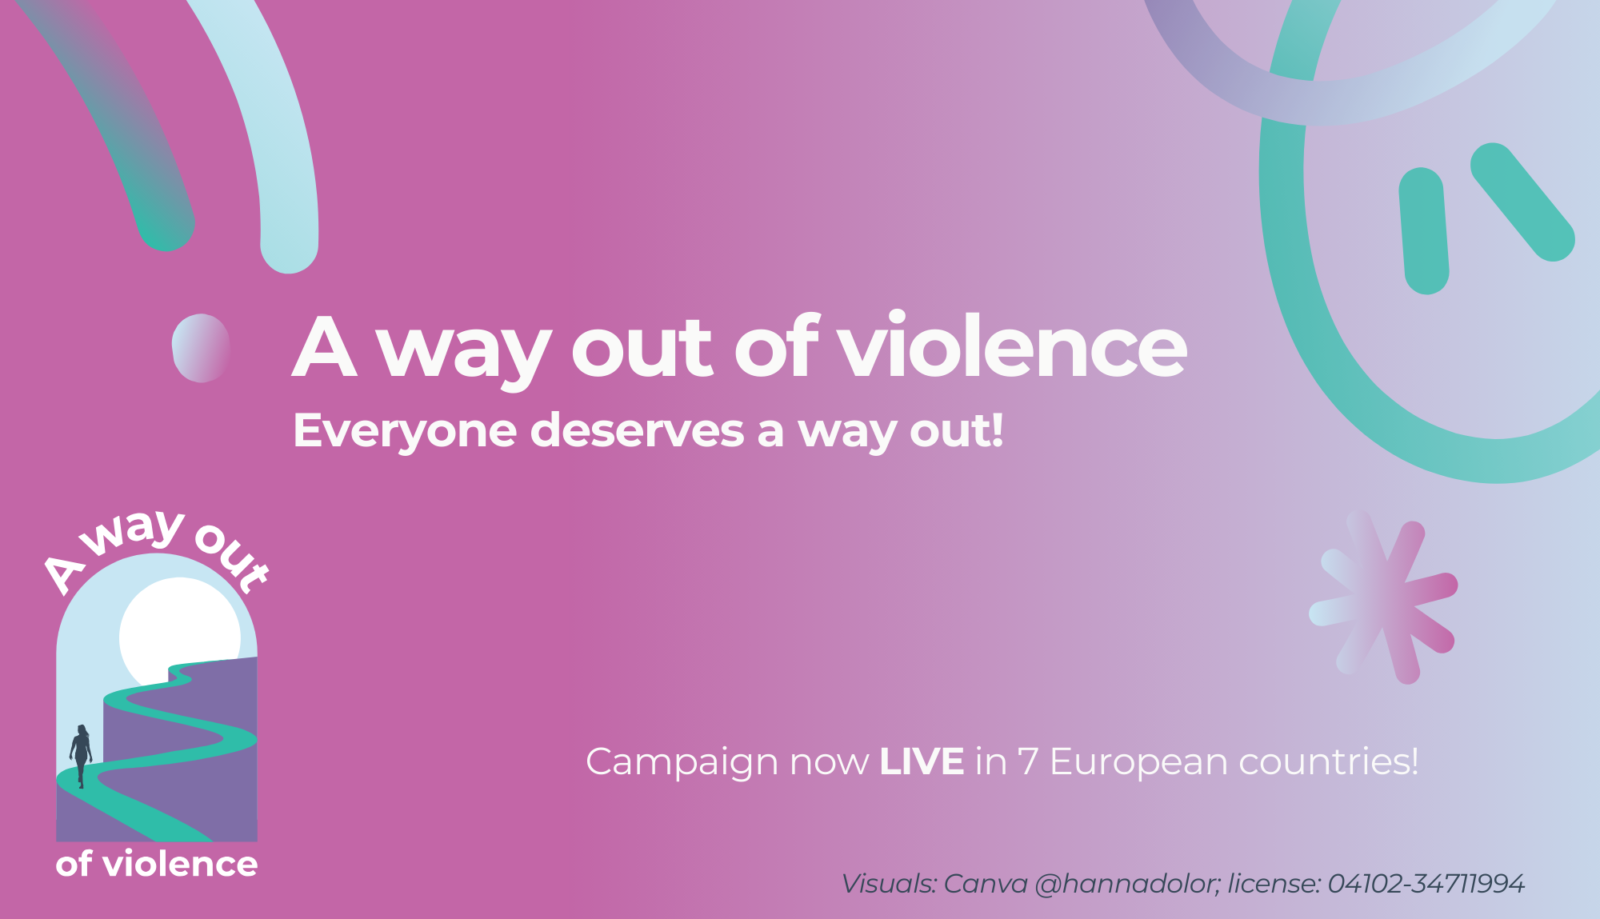 Picture with a pink background and the text: "A way out of violence. Everybody deserves a way out! Campaign now live in 7 European countries.